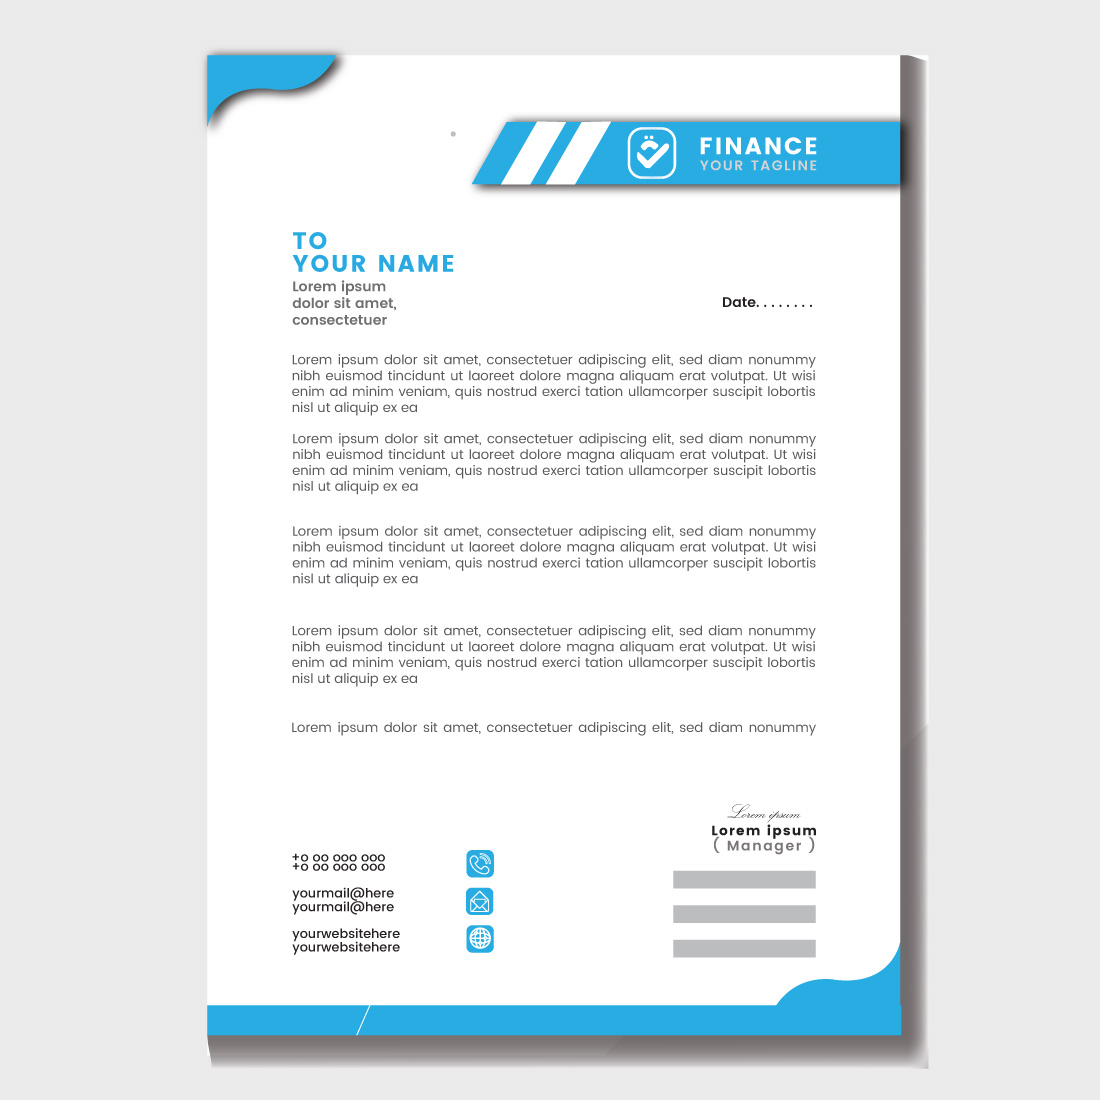 03 Modern letterhead template | Letterhead template design for your business preview image.